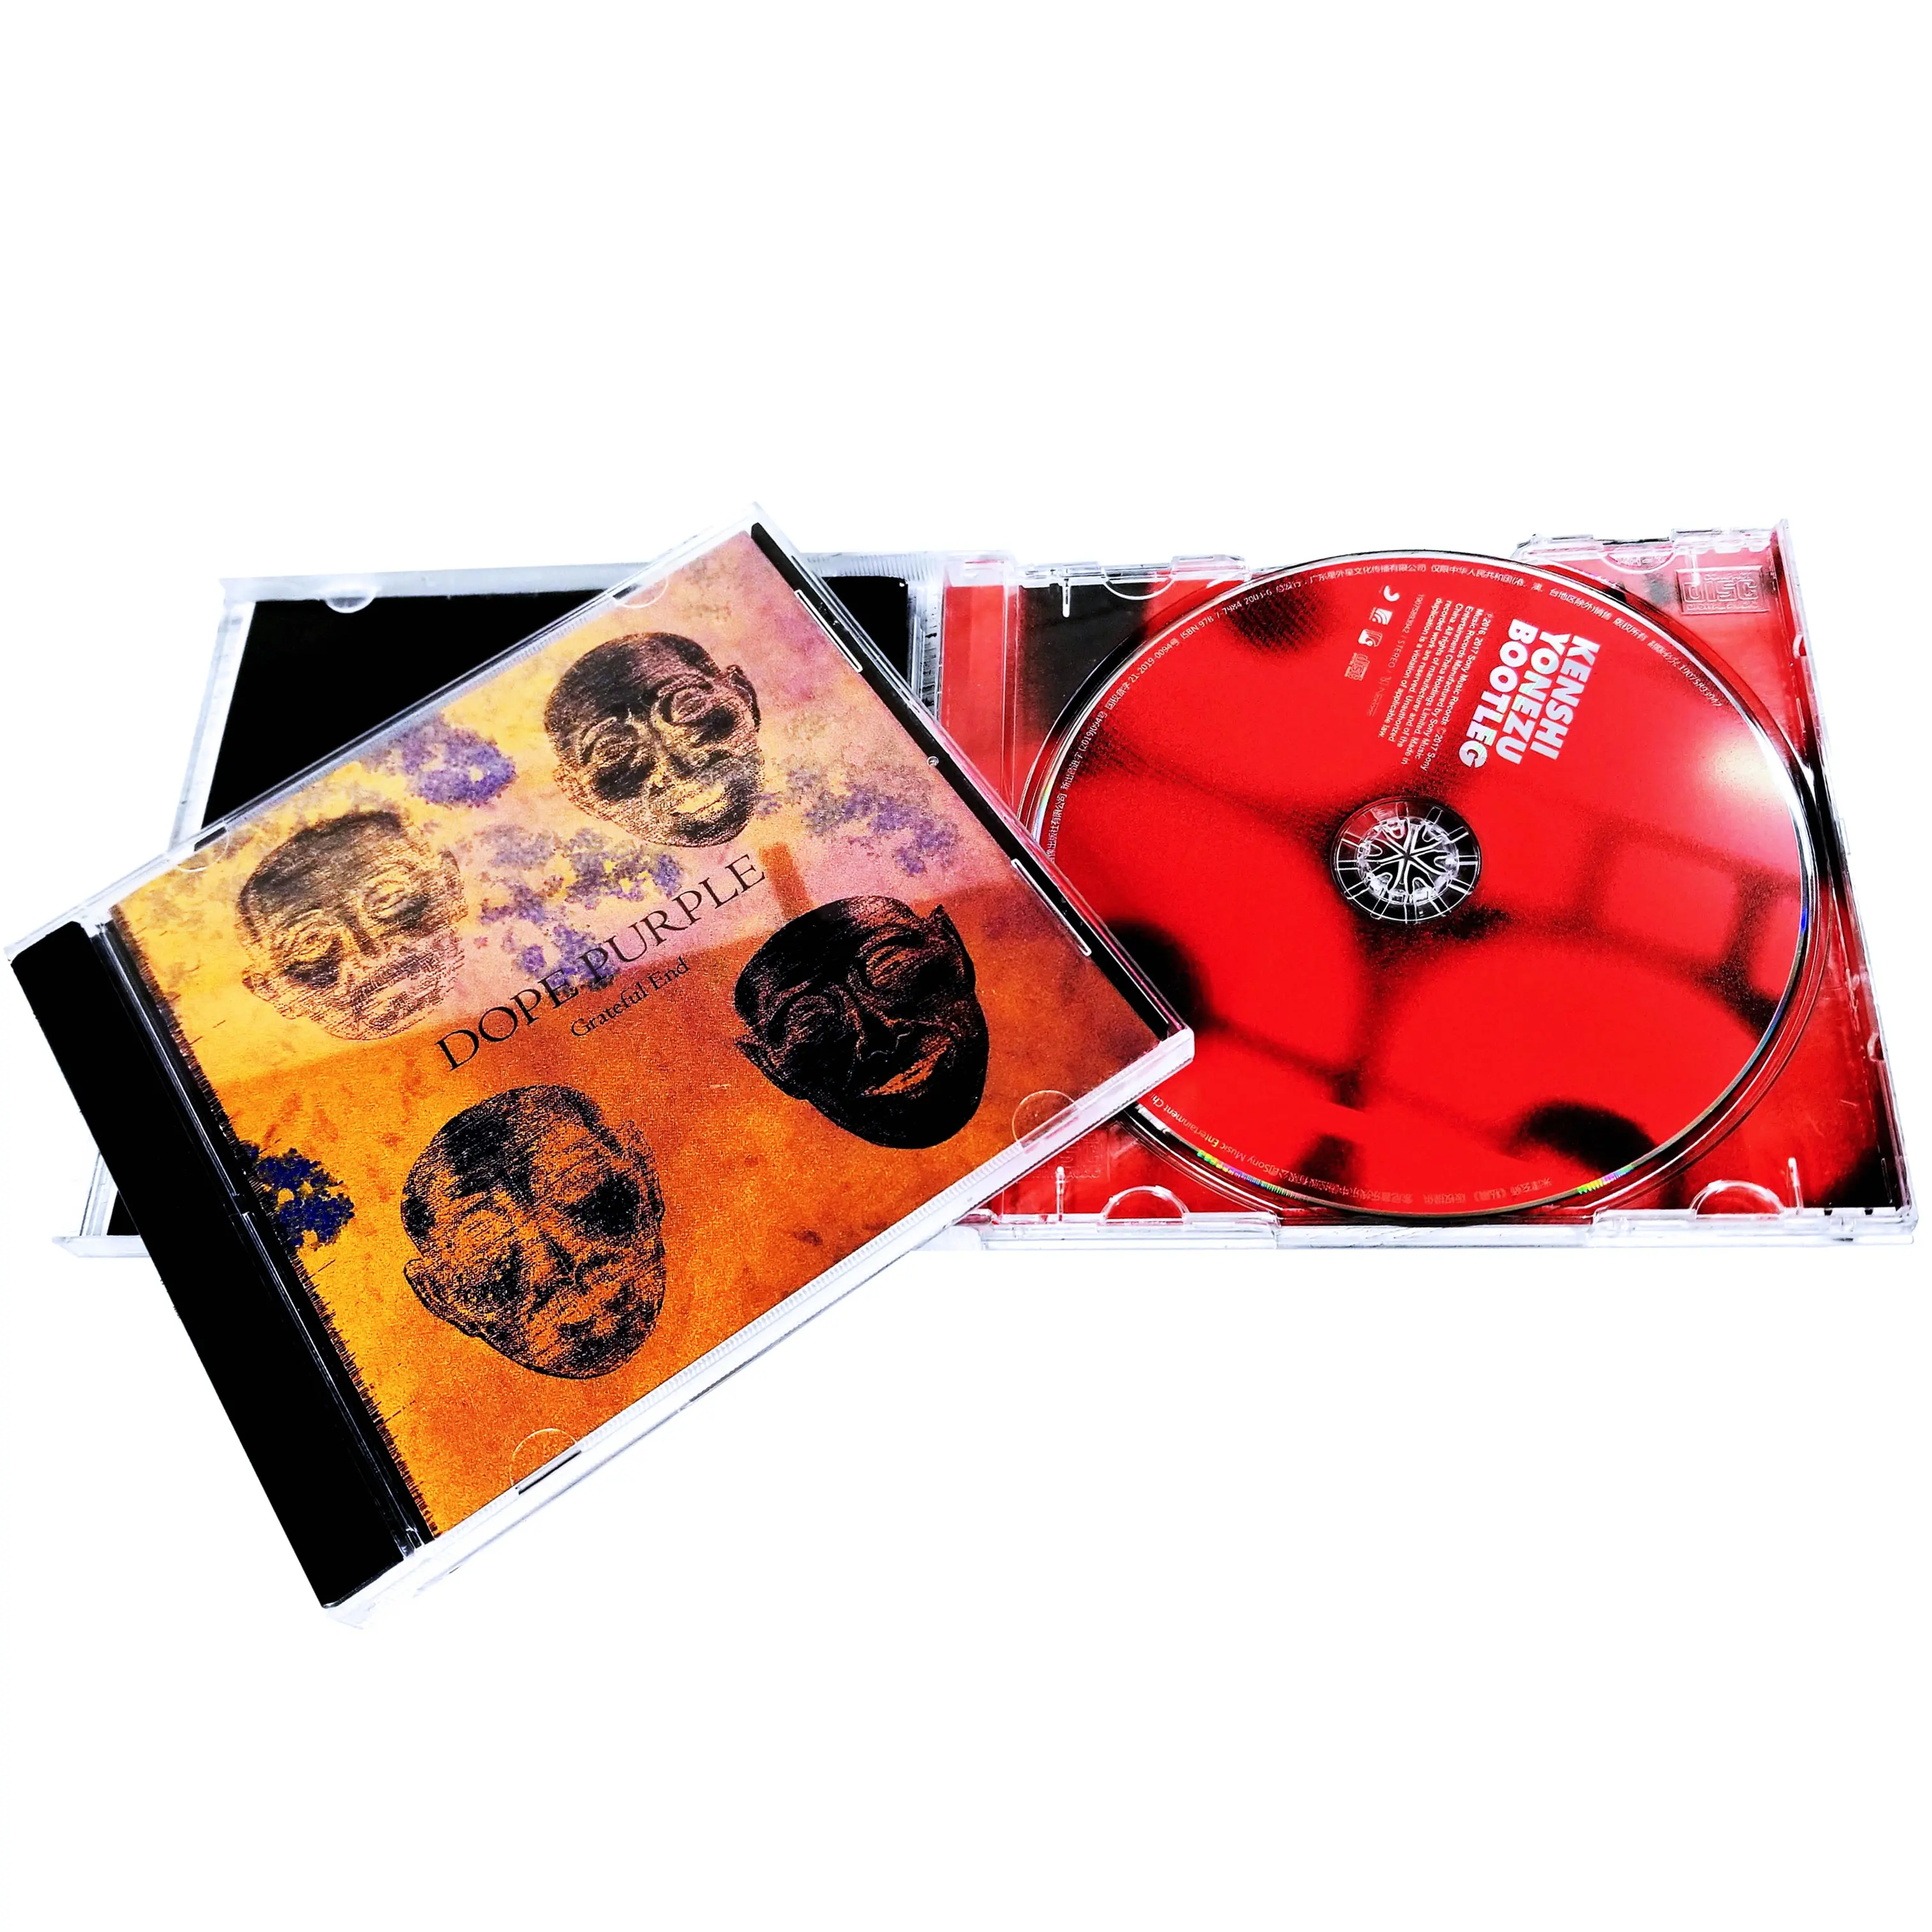 Sliver Disc in CD Replication Duplication Jewel Case CD Printing Services